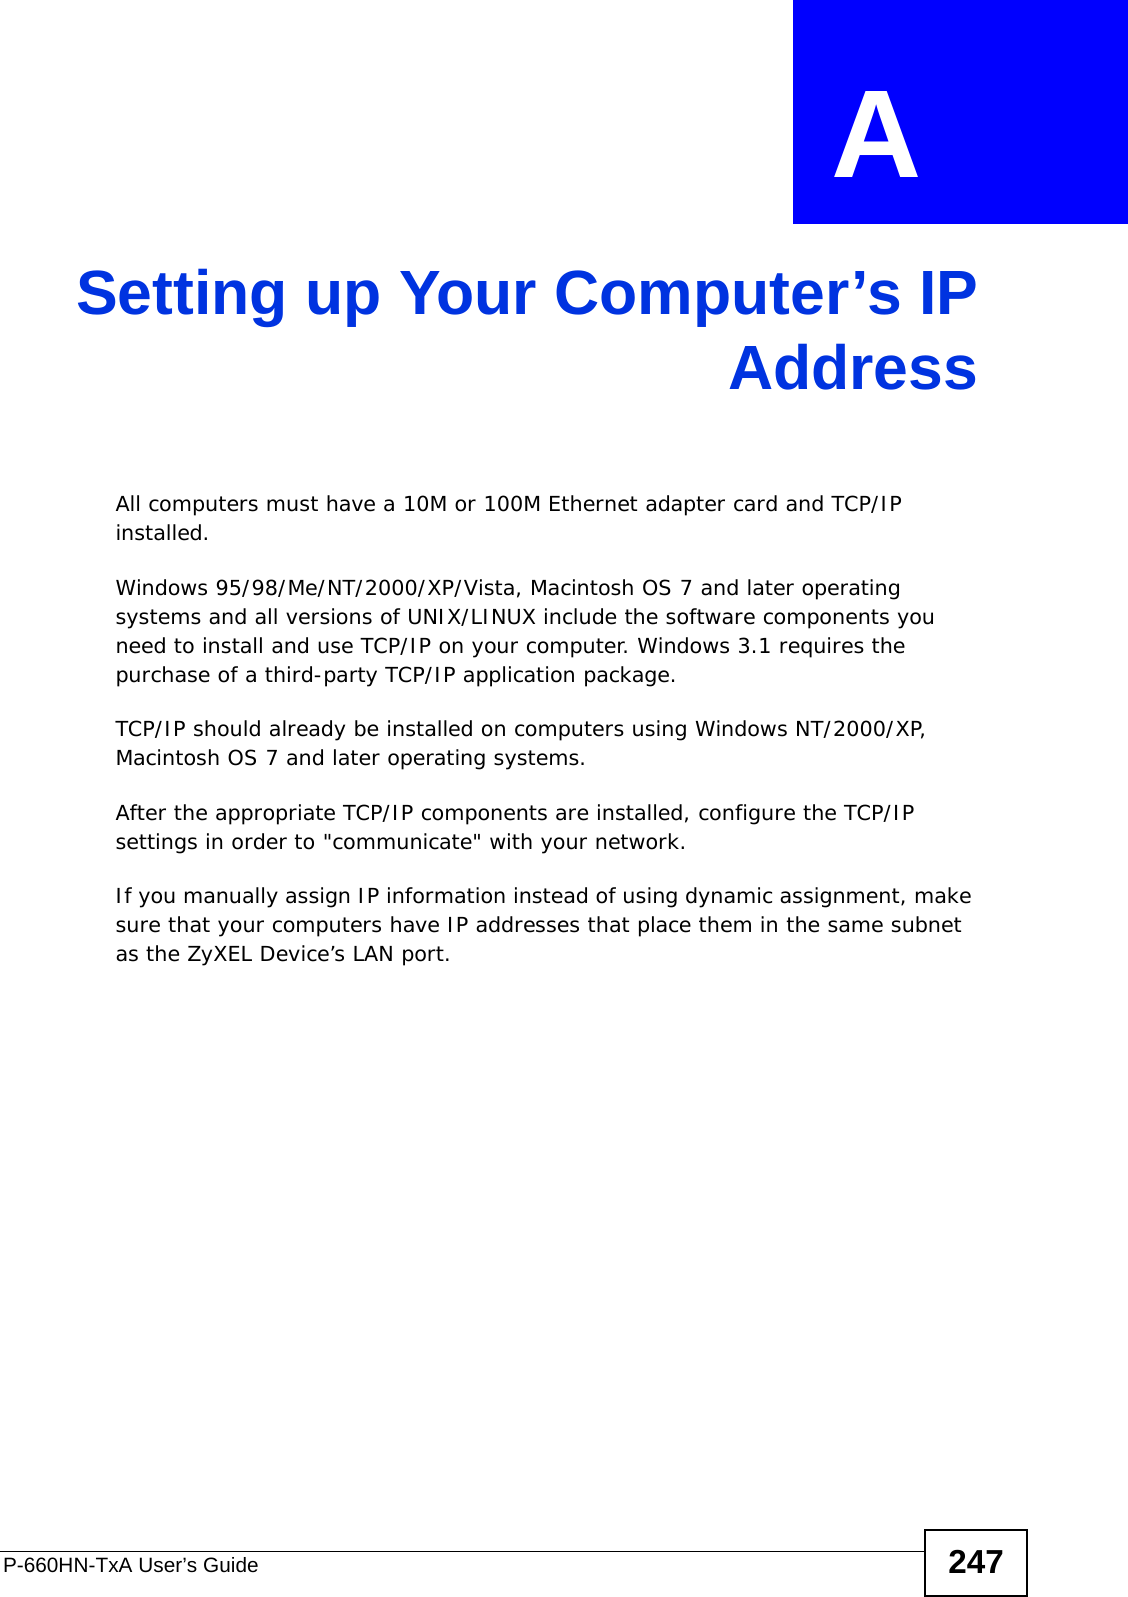 P-660HN-TxA User’s Guide 247APPENDIX  A Setting up Your Computer’s IPAddressAll computers must have a 10M or 100M Ethernet adapter card and TCP/IP installed. Windows 95/98/Me/NT/2000/XP/Vista, Macintosh OS 7 and later operating systems and all versions of UNIX/LINUX include the software components you need to install and use TCP/IP on your computer. Windows 3.1 requires the purchase of a third-party TCP/IP application package.TCP/IP should already be installed on computers using Windows NT/2000/XP, Macintosh OS 7 and later operating systems.After the appropriate TCP/IP components are installed, configure the TCP/IP settings in order to &quot;communicate&quot; with your network. If you manually assign IP information instead of using dynamic assignment, make sure that your computers have IP addresses that place them in the same subnet as the ZyXEL Device’s LAN port.